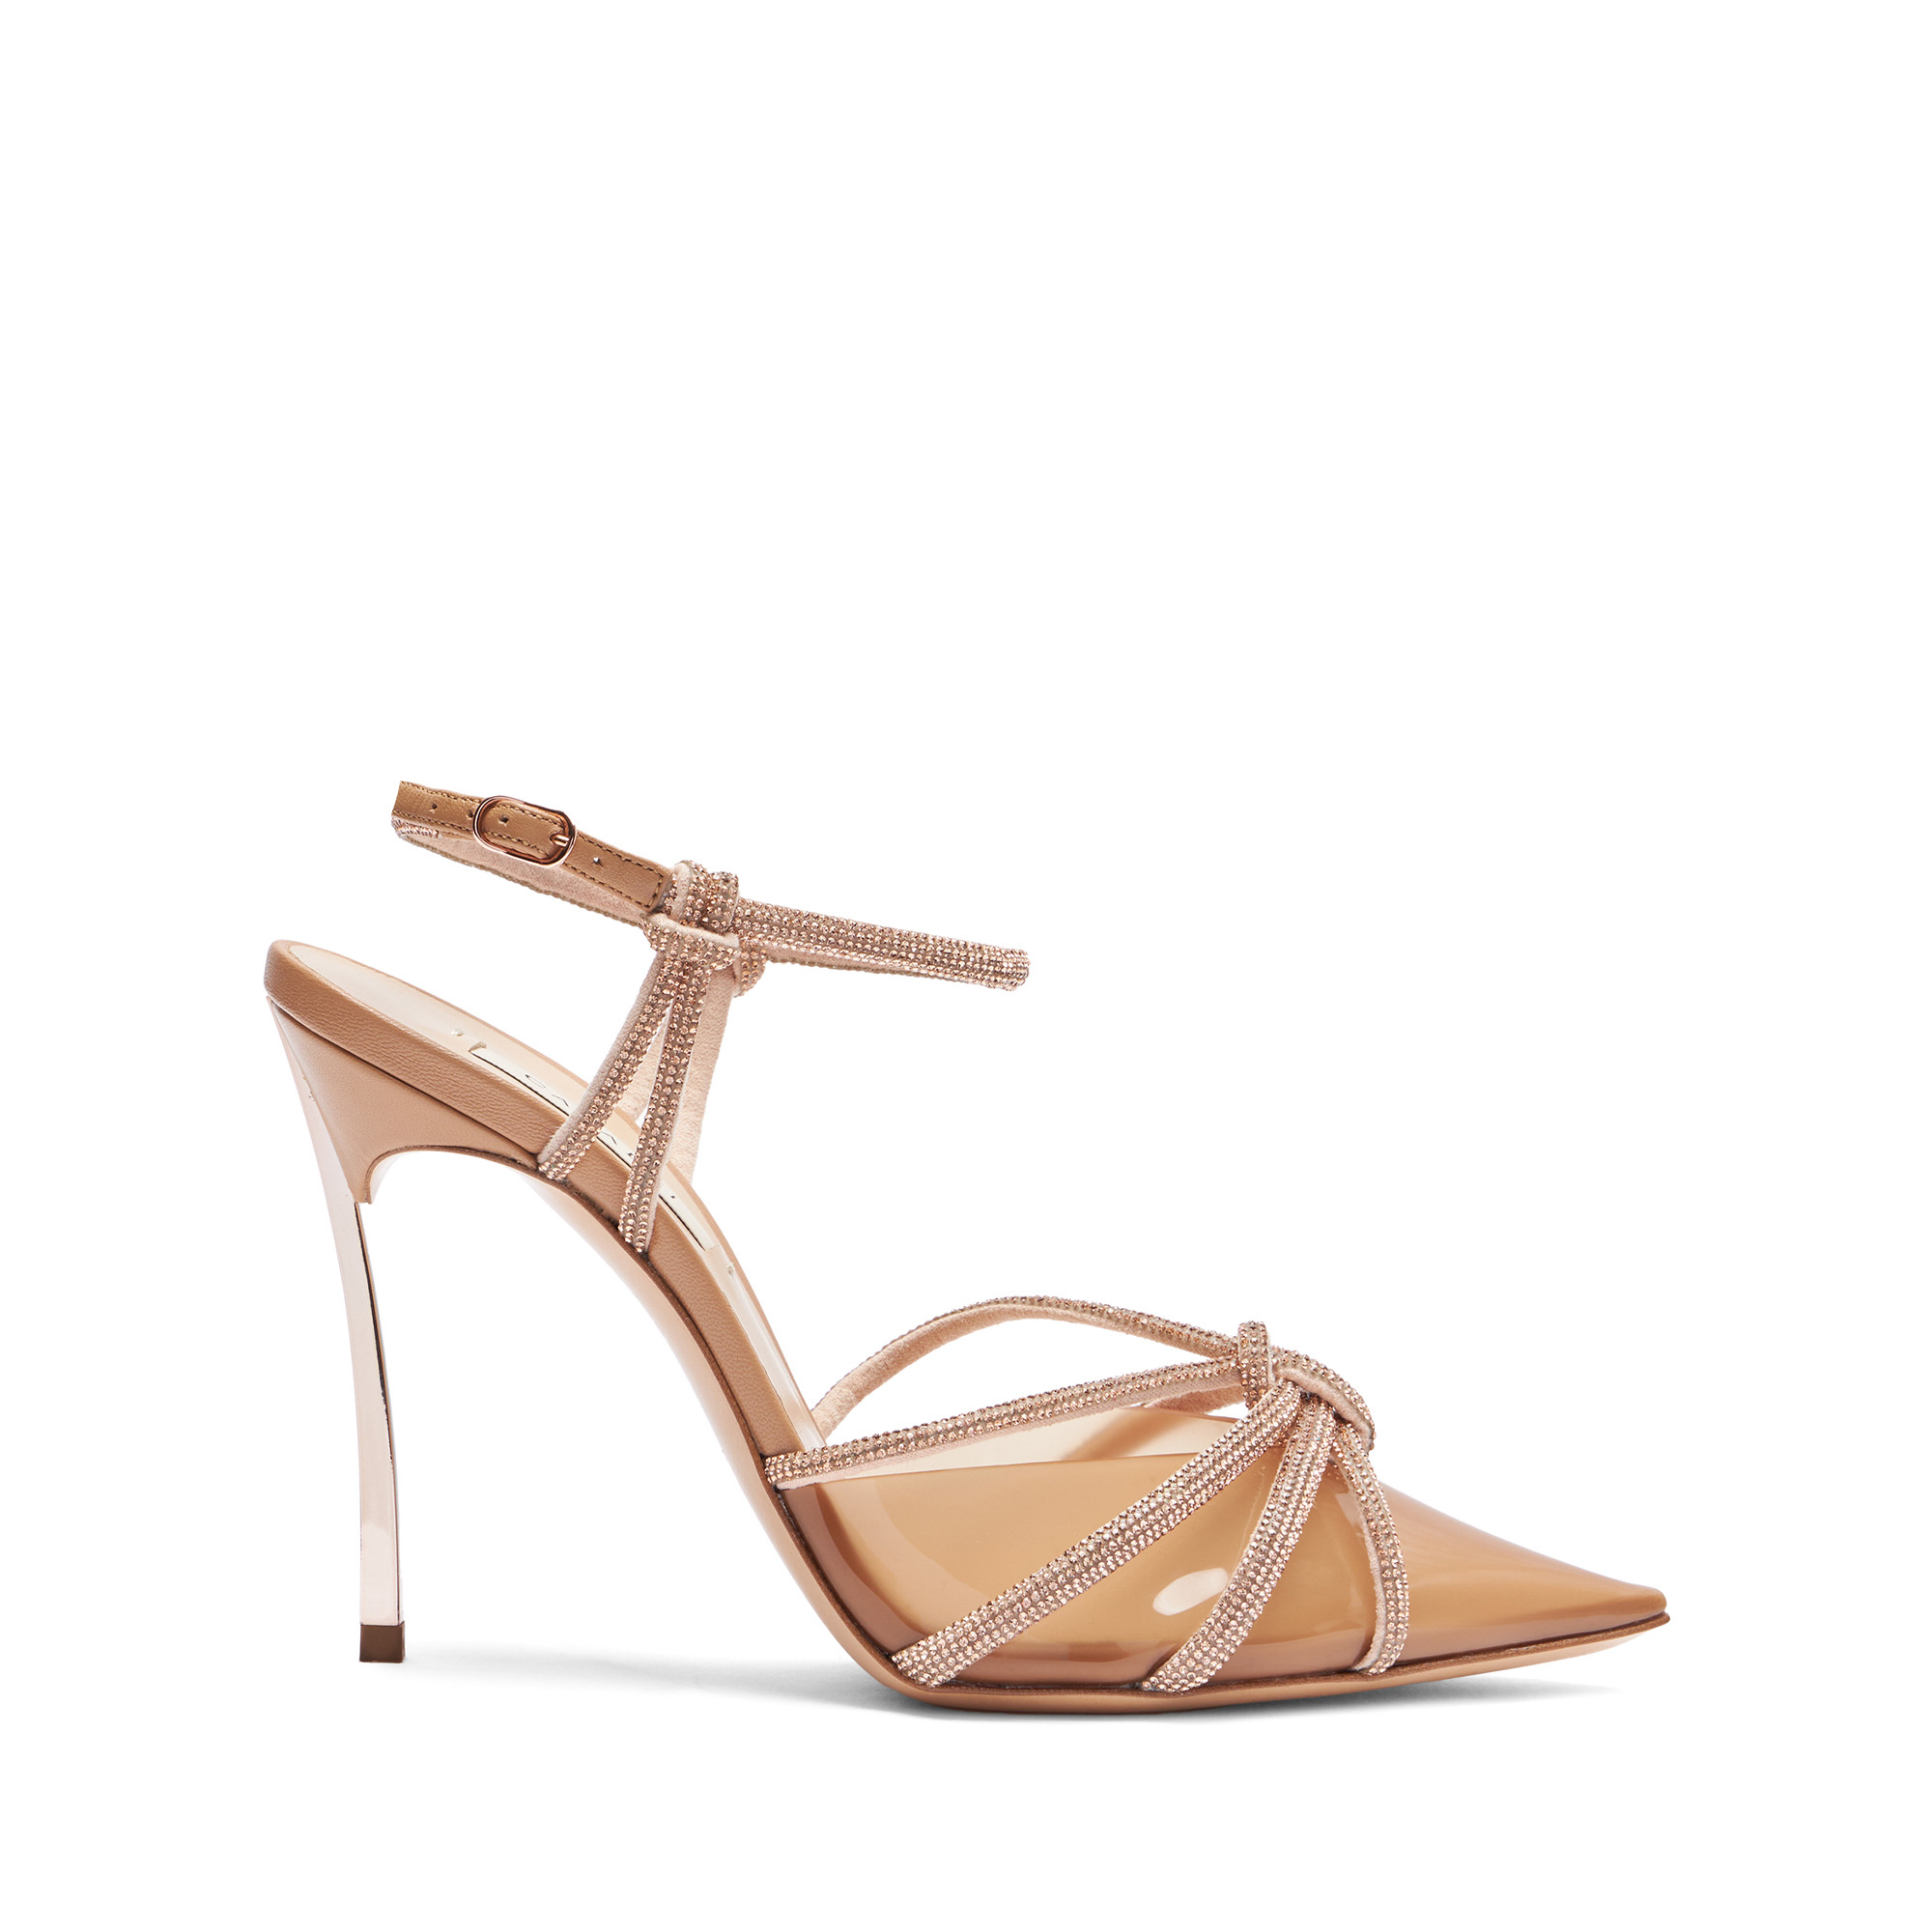 Casadei Blade C+c  Pvc - Woman Pumps And Slingback Toffee And Light Peach 37